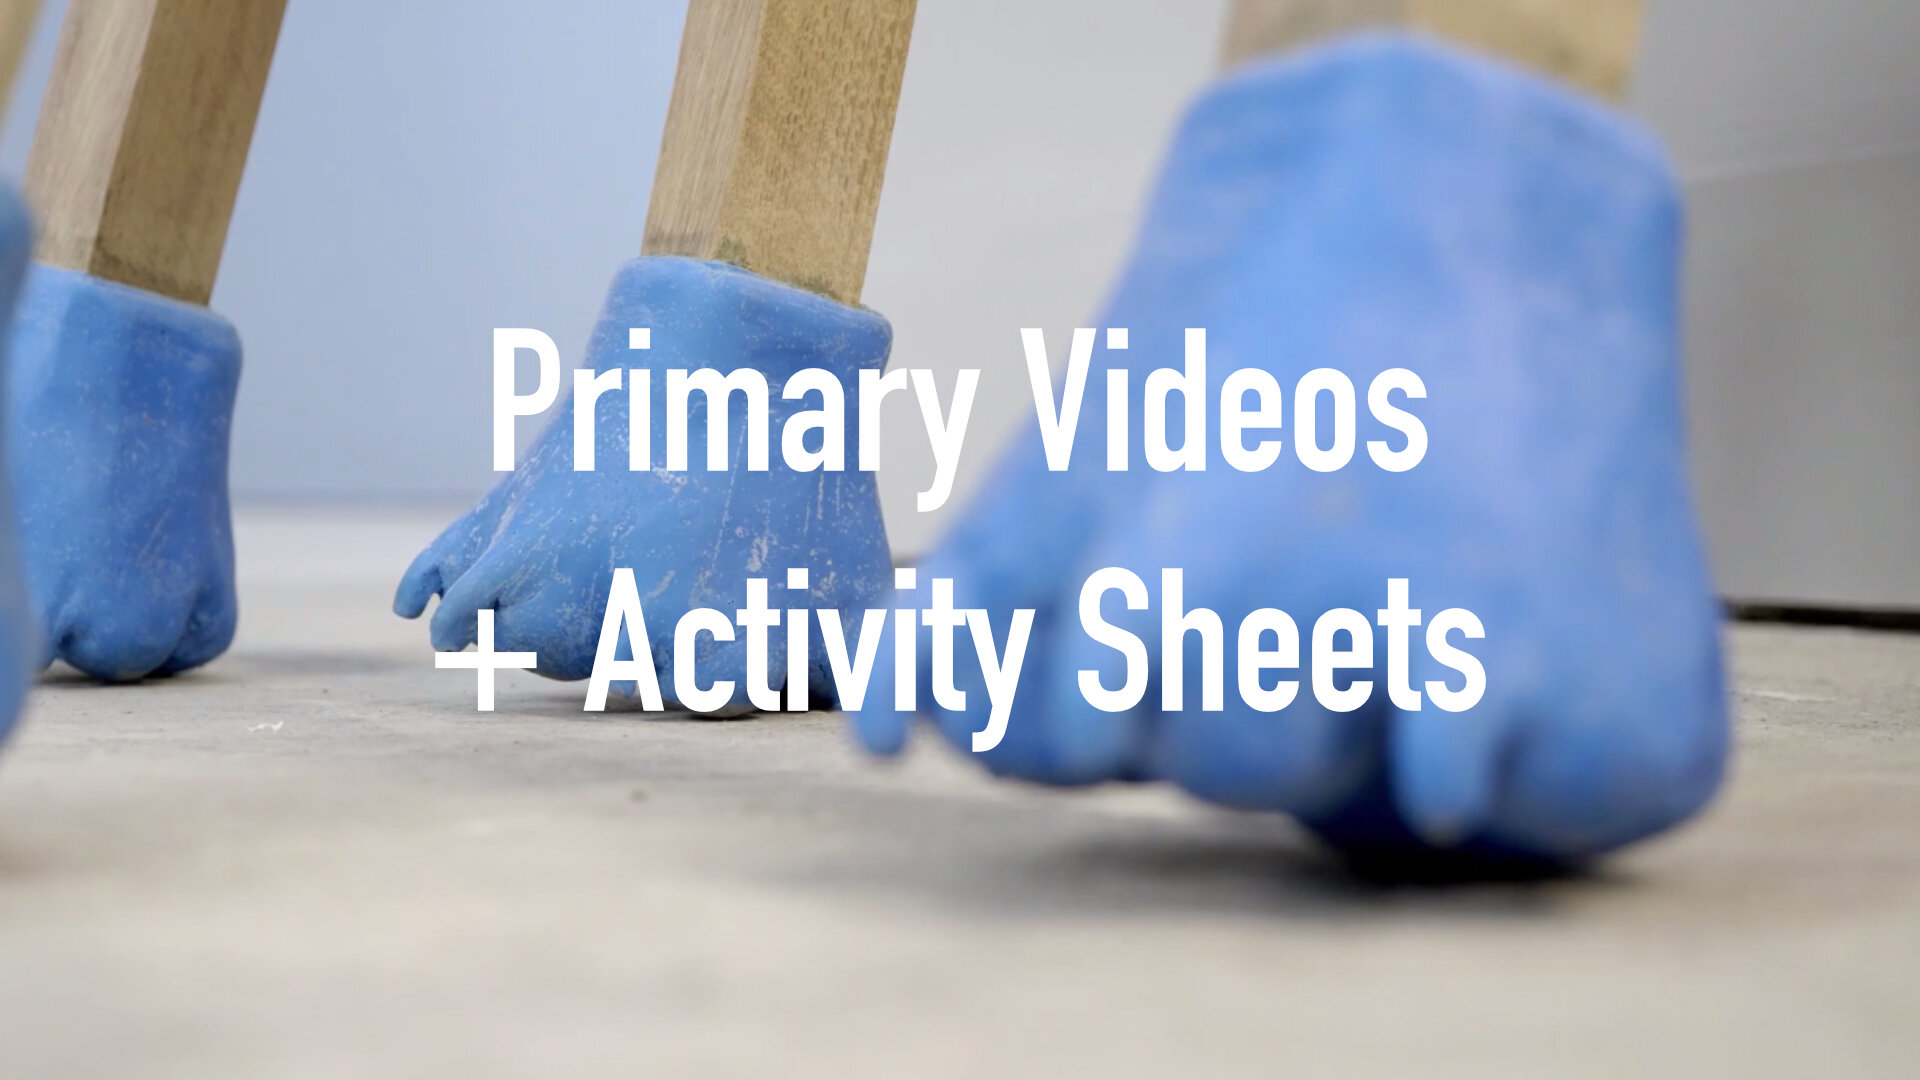 primary videos + activity sheets banner.jpg